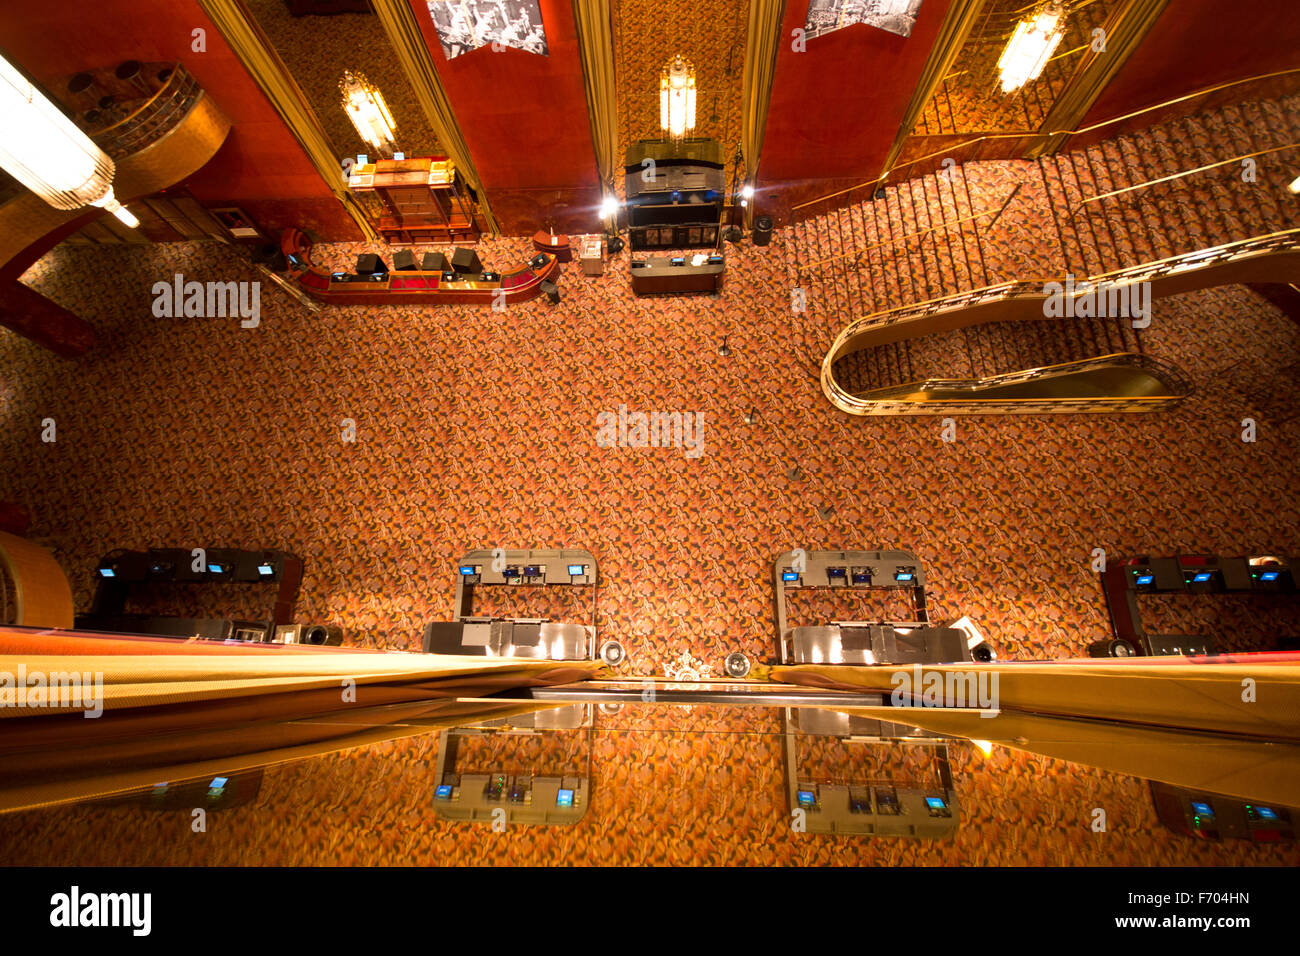 Interior view from above at historic Radio City Music Hall in New York City Stock Photo